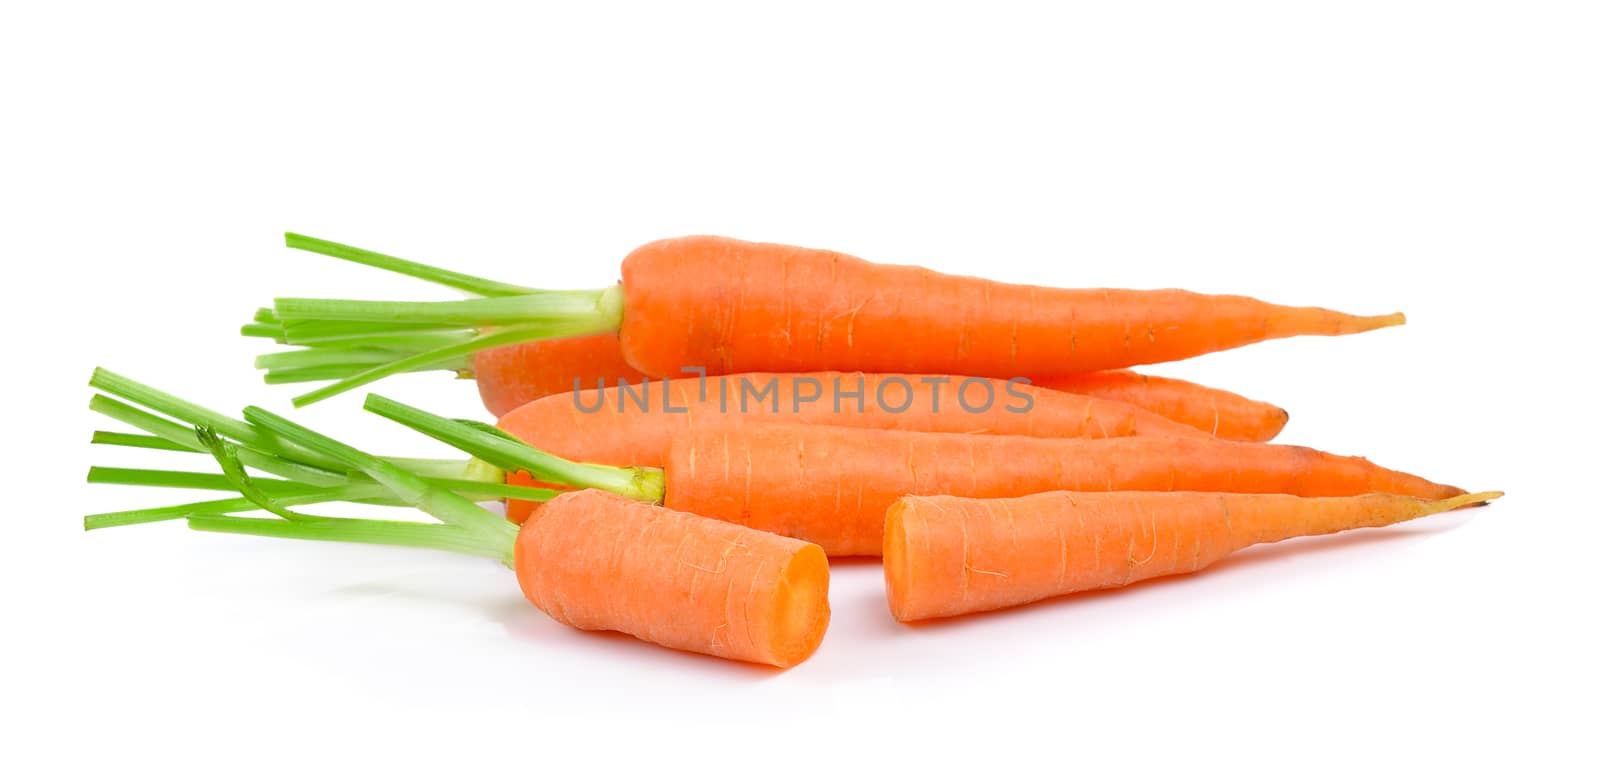  baby carrots on white background by sommai